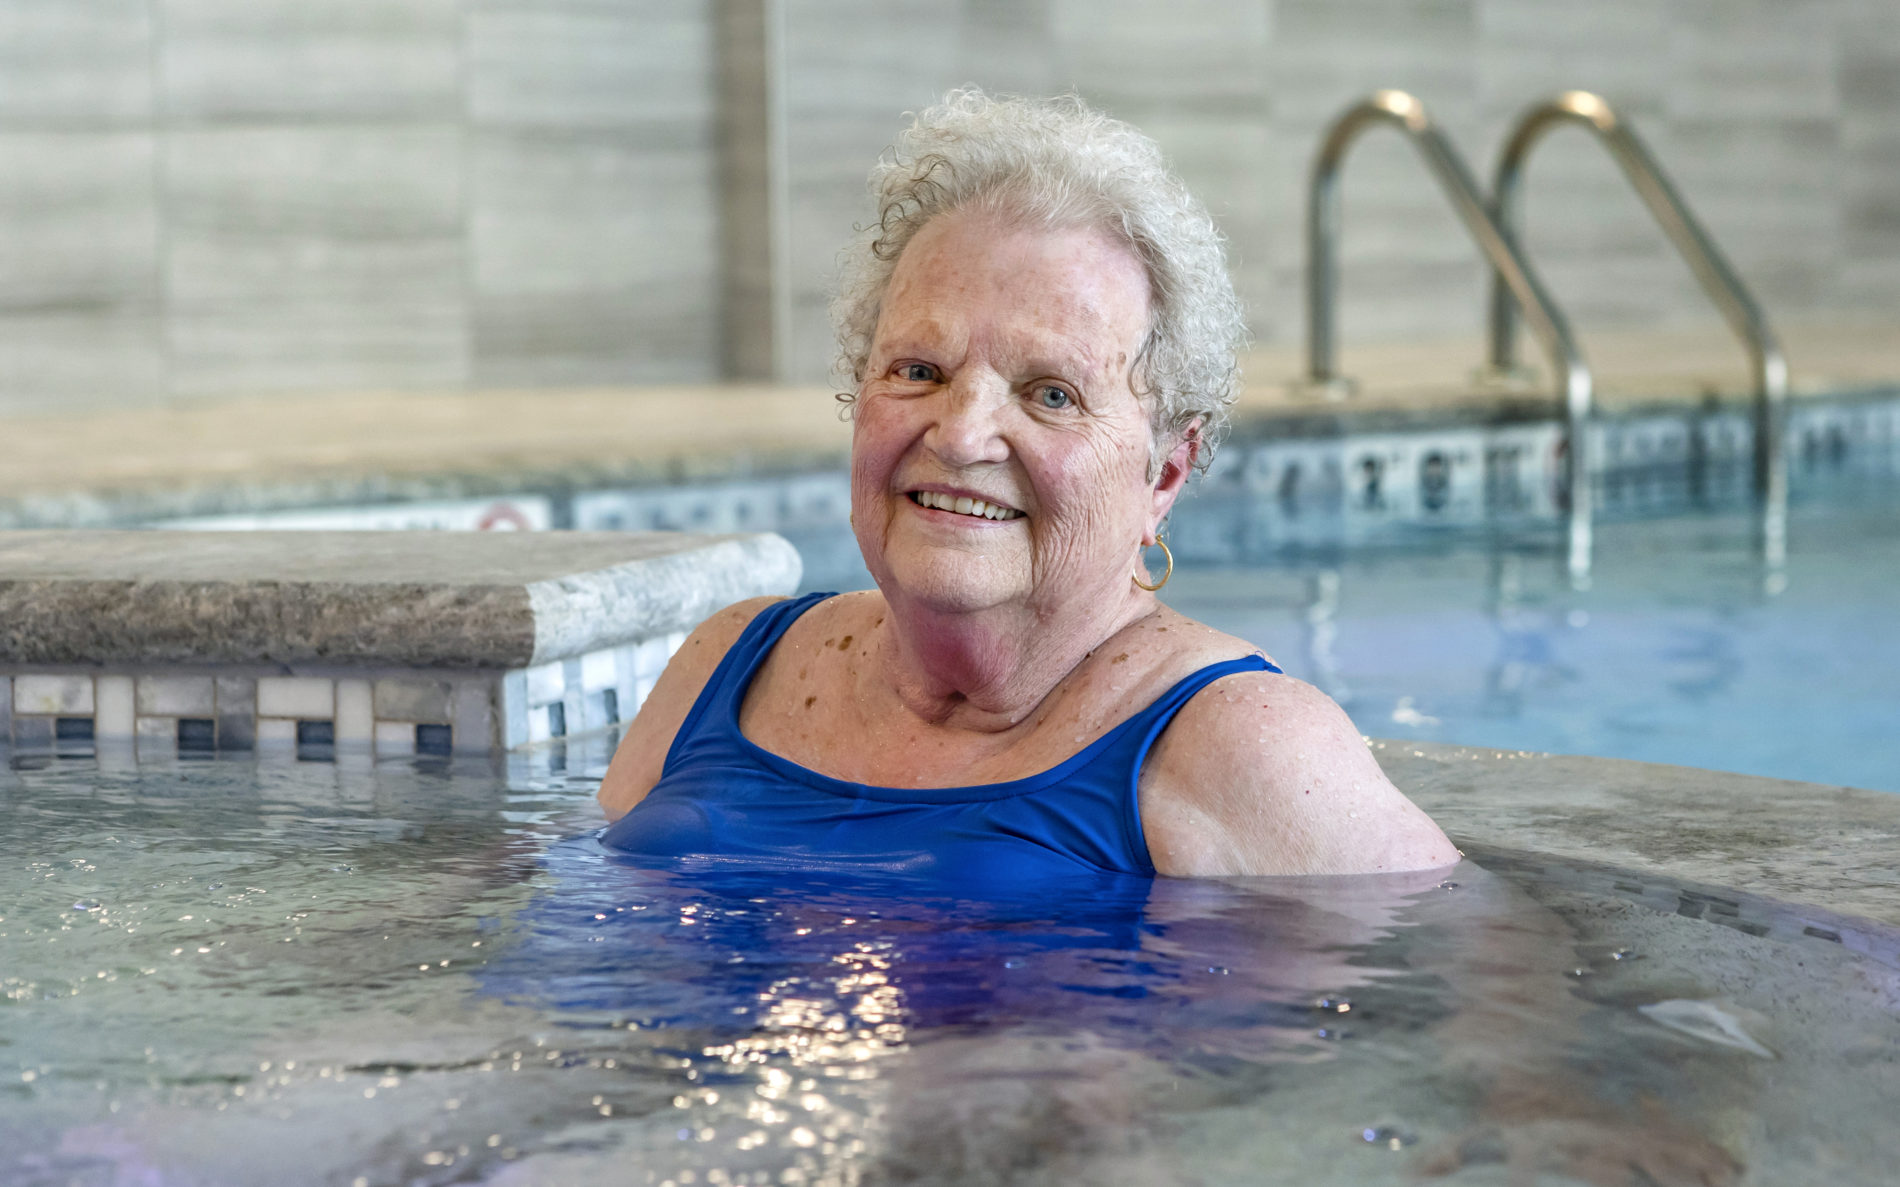 Elderly woman smiling while in jacuzzi